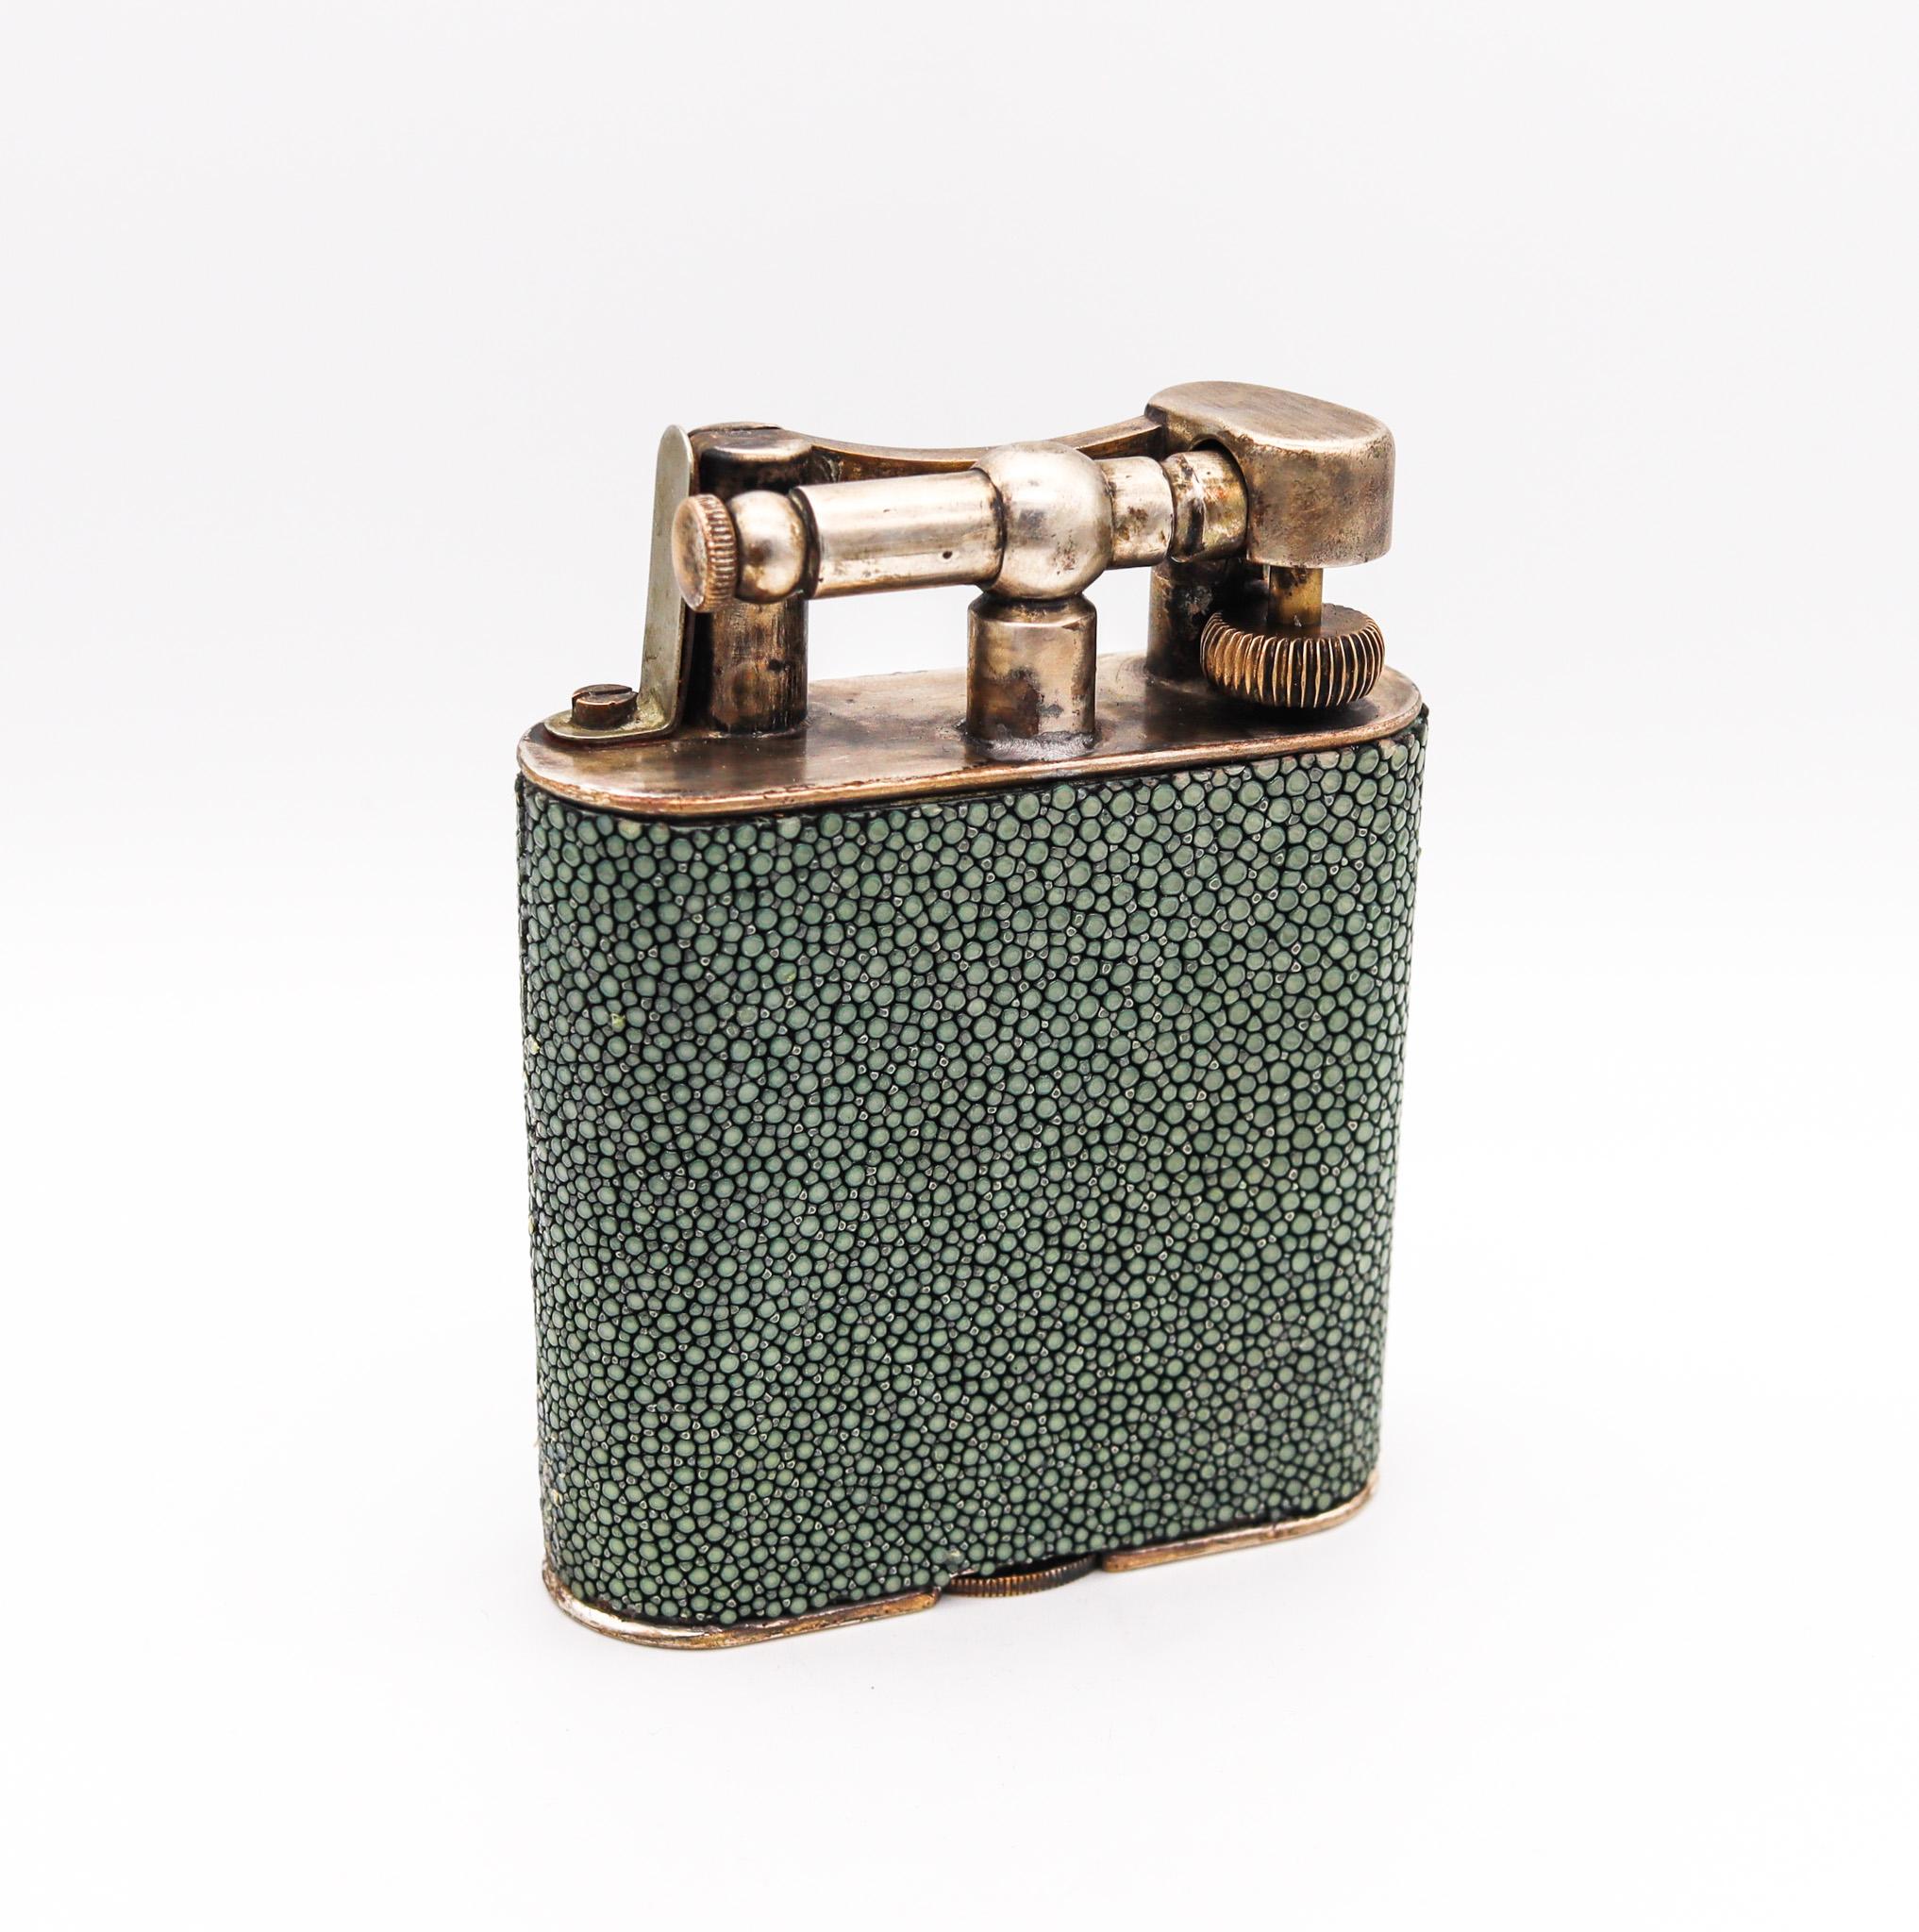 mirror quality alfred dunhill lighters